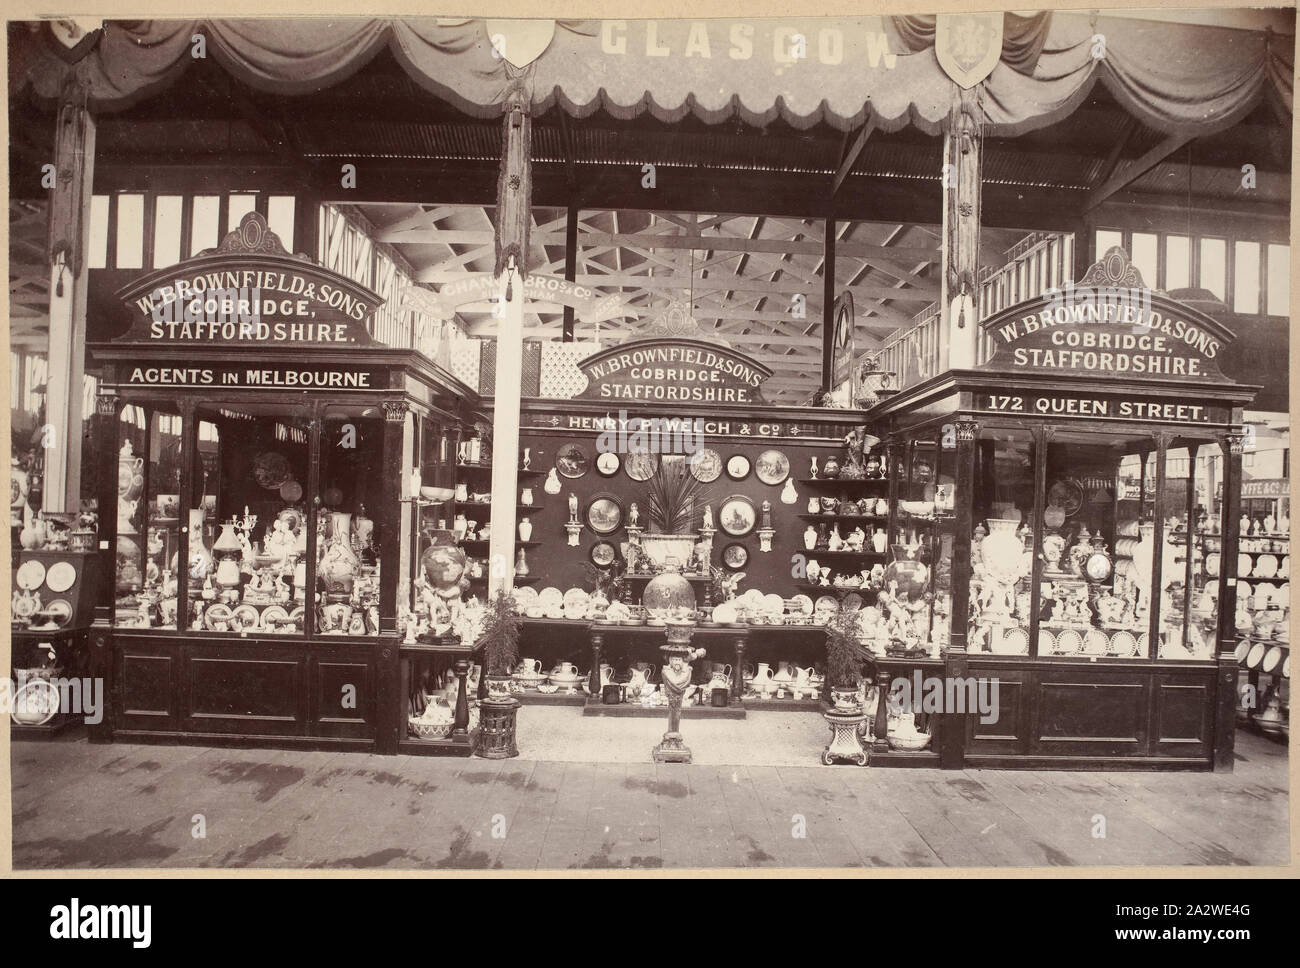 Photograph - British Court, Main Avenue, Exhibition Building, 1880-1881, View of the ceramic displays of W. Brownfield & Sons of Staffordshire, in the British Court on the western side of the temporary annexe's main avenue during the 1880 Melbourne International Exhibition held at the Exhibition Buildings, between 1 October 1880 and 30 April 1881. Brownfield & Sons had their display next to the other reputable British ceramic firm, Mintons, and like them, their Stock Photo